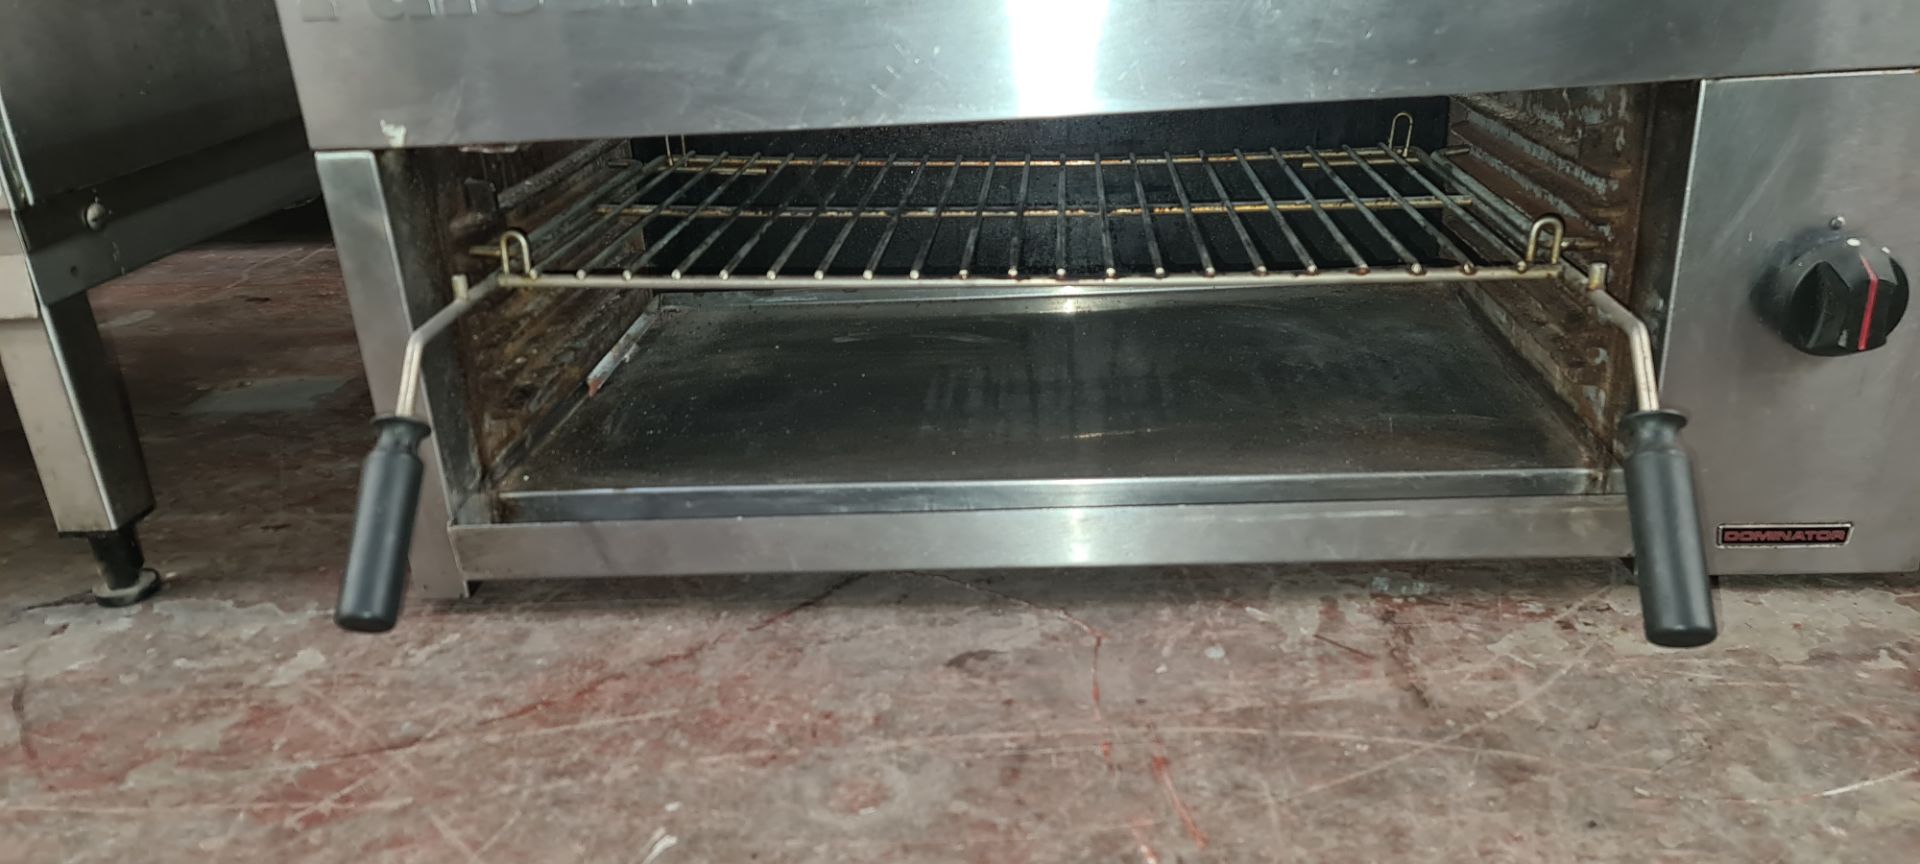 Falcon stainless steel large salamander grill system approx. 900mm wide - Image 3 of 6